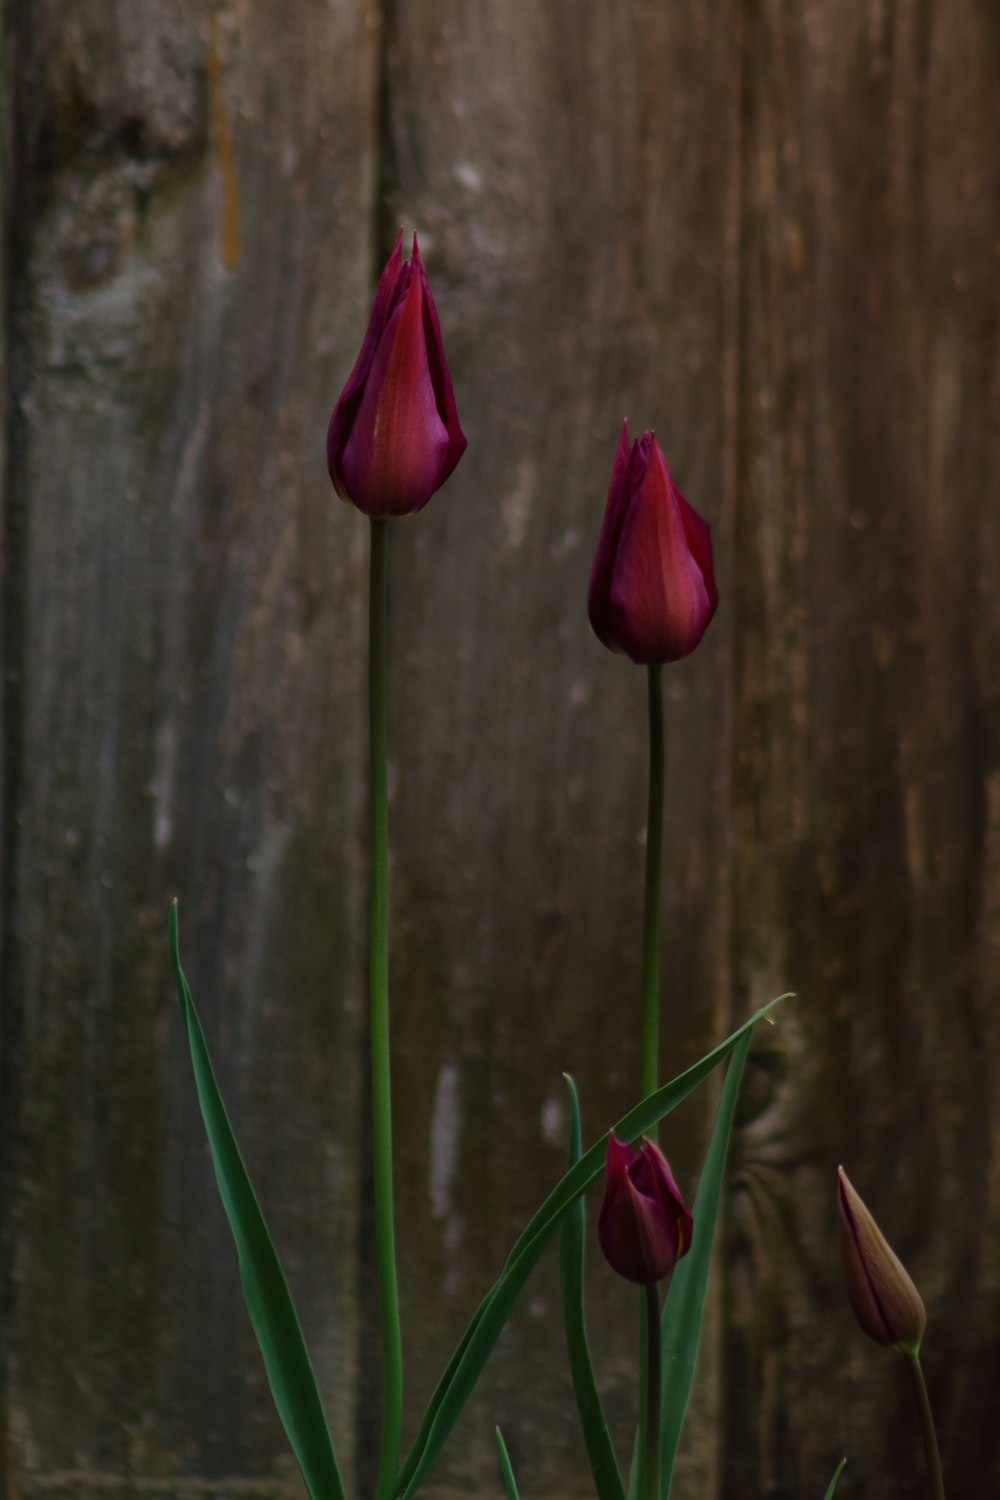 three red tulips in front of a wooden wall